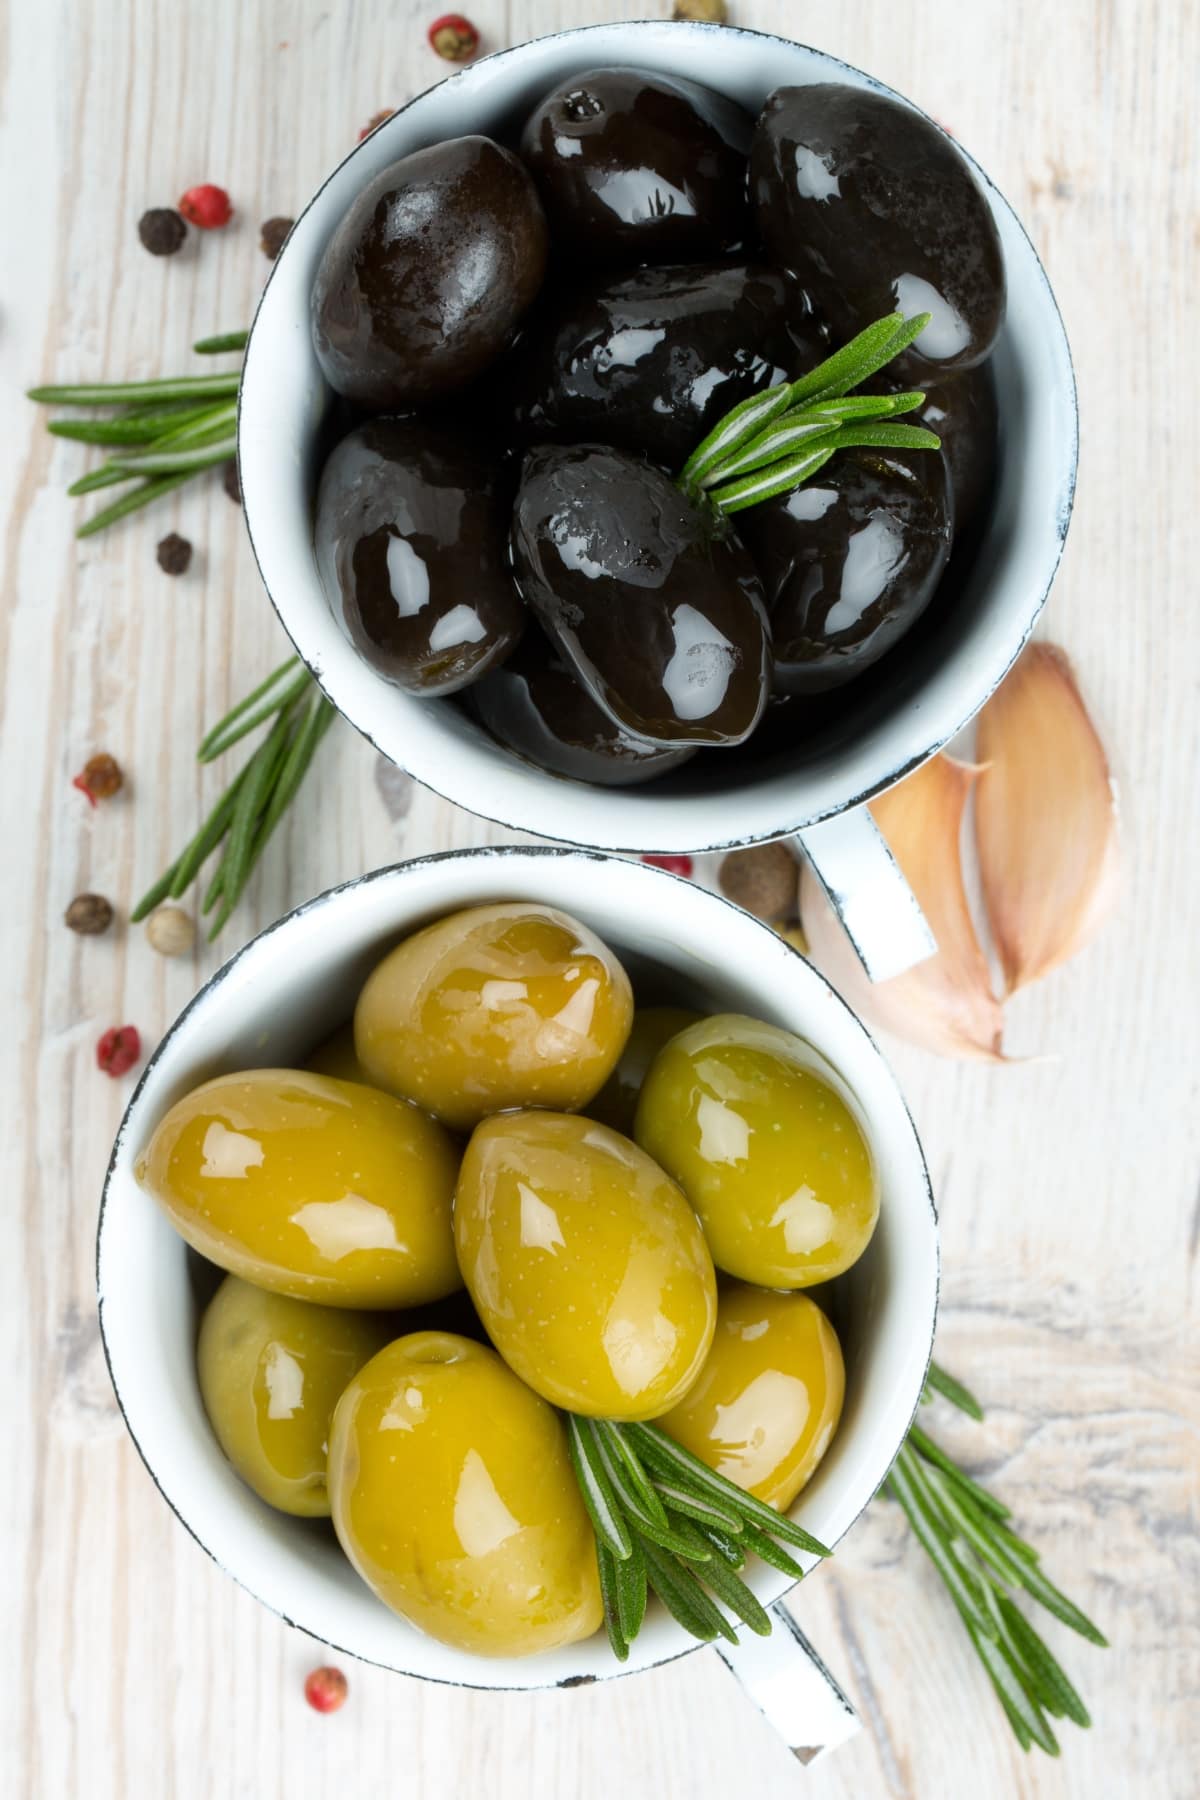 Fresh Black and Green Olives